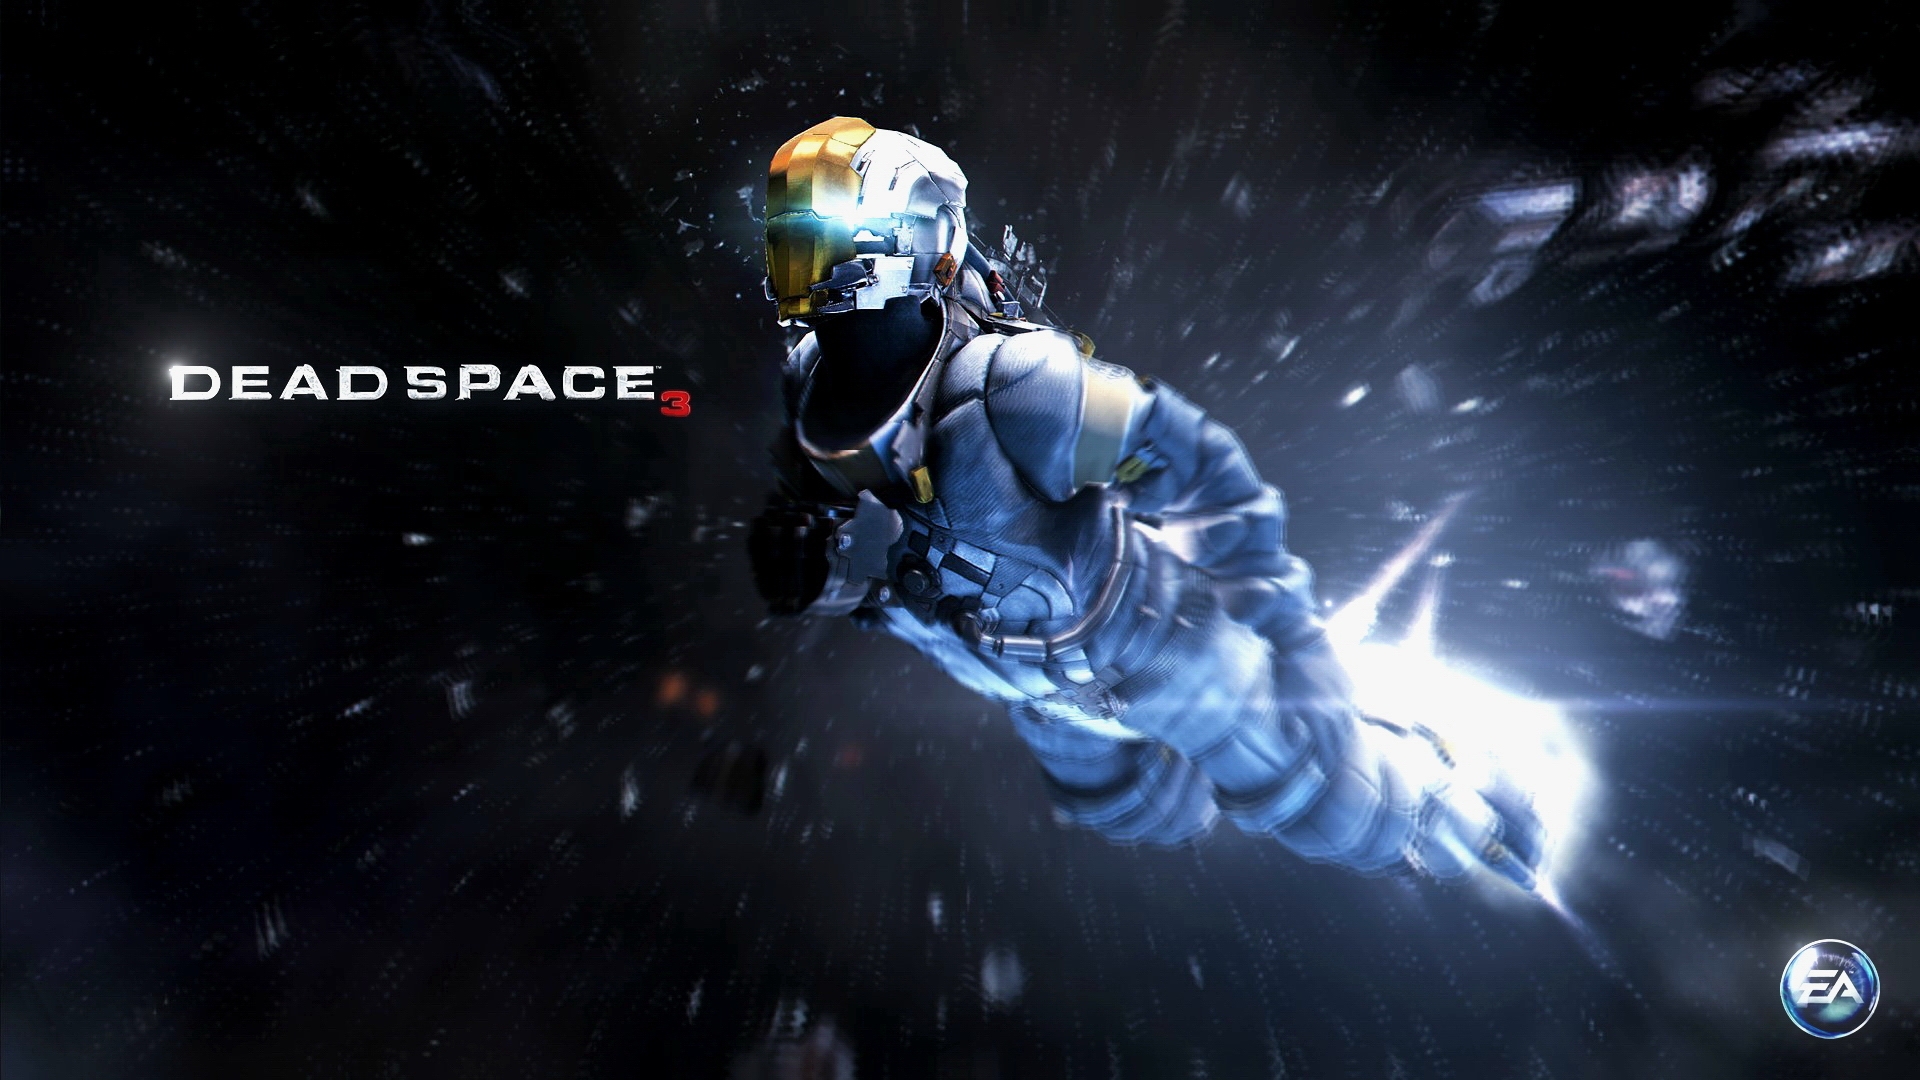 Dead Space 3 Game for 1920 x 1080 HDTV 1080p resolution